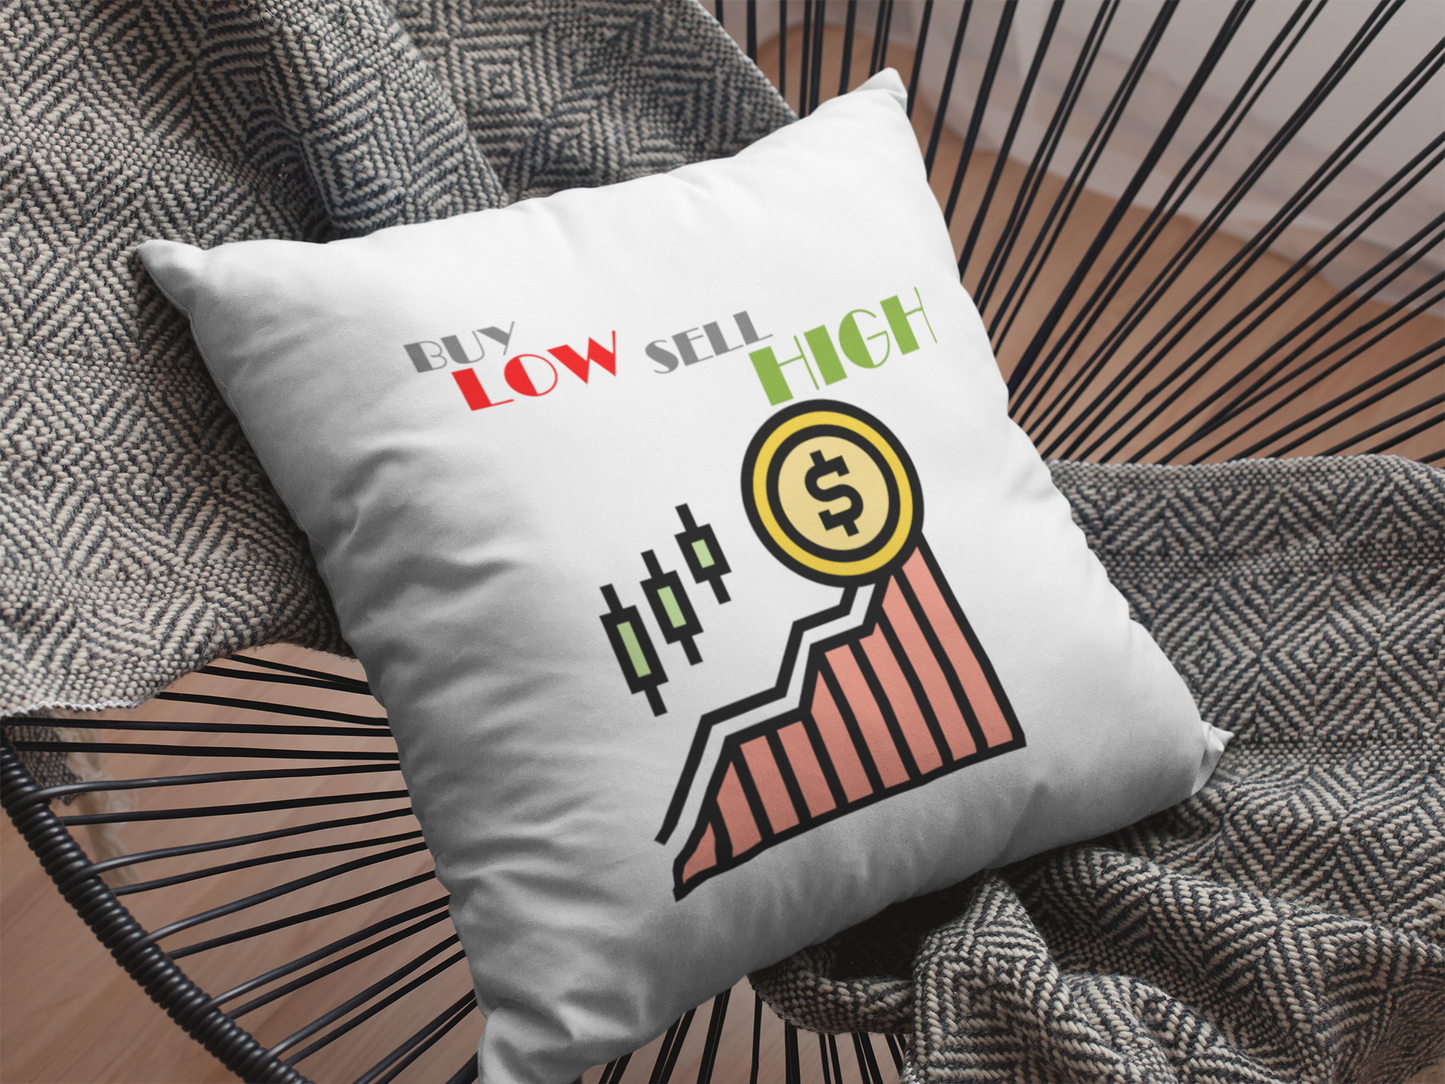 Buy Low Sell High Printed Cushion